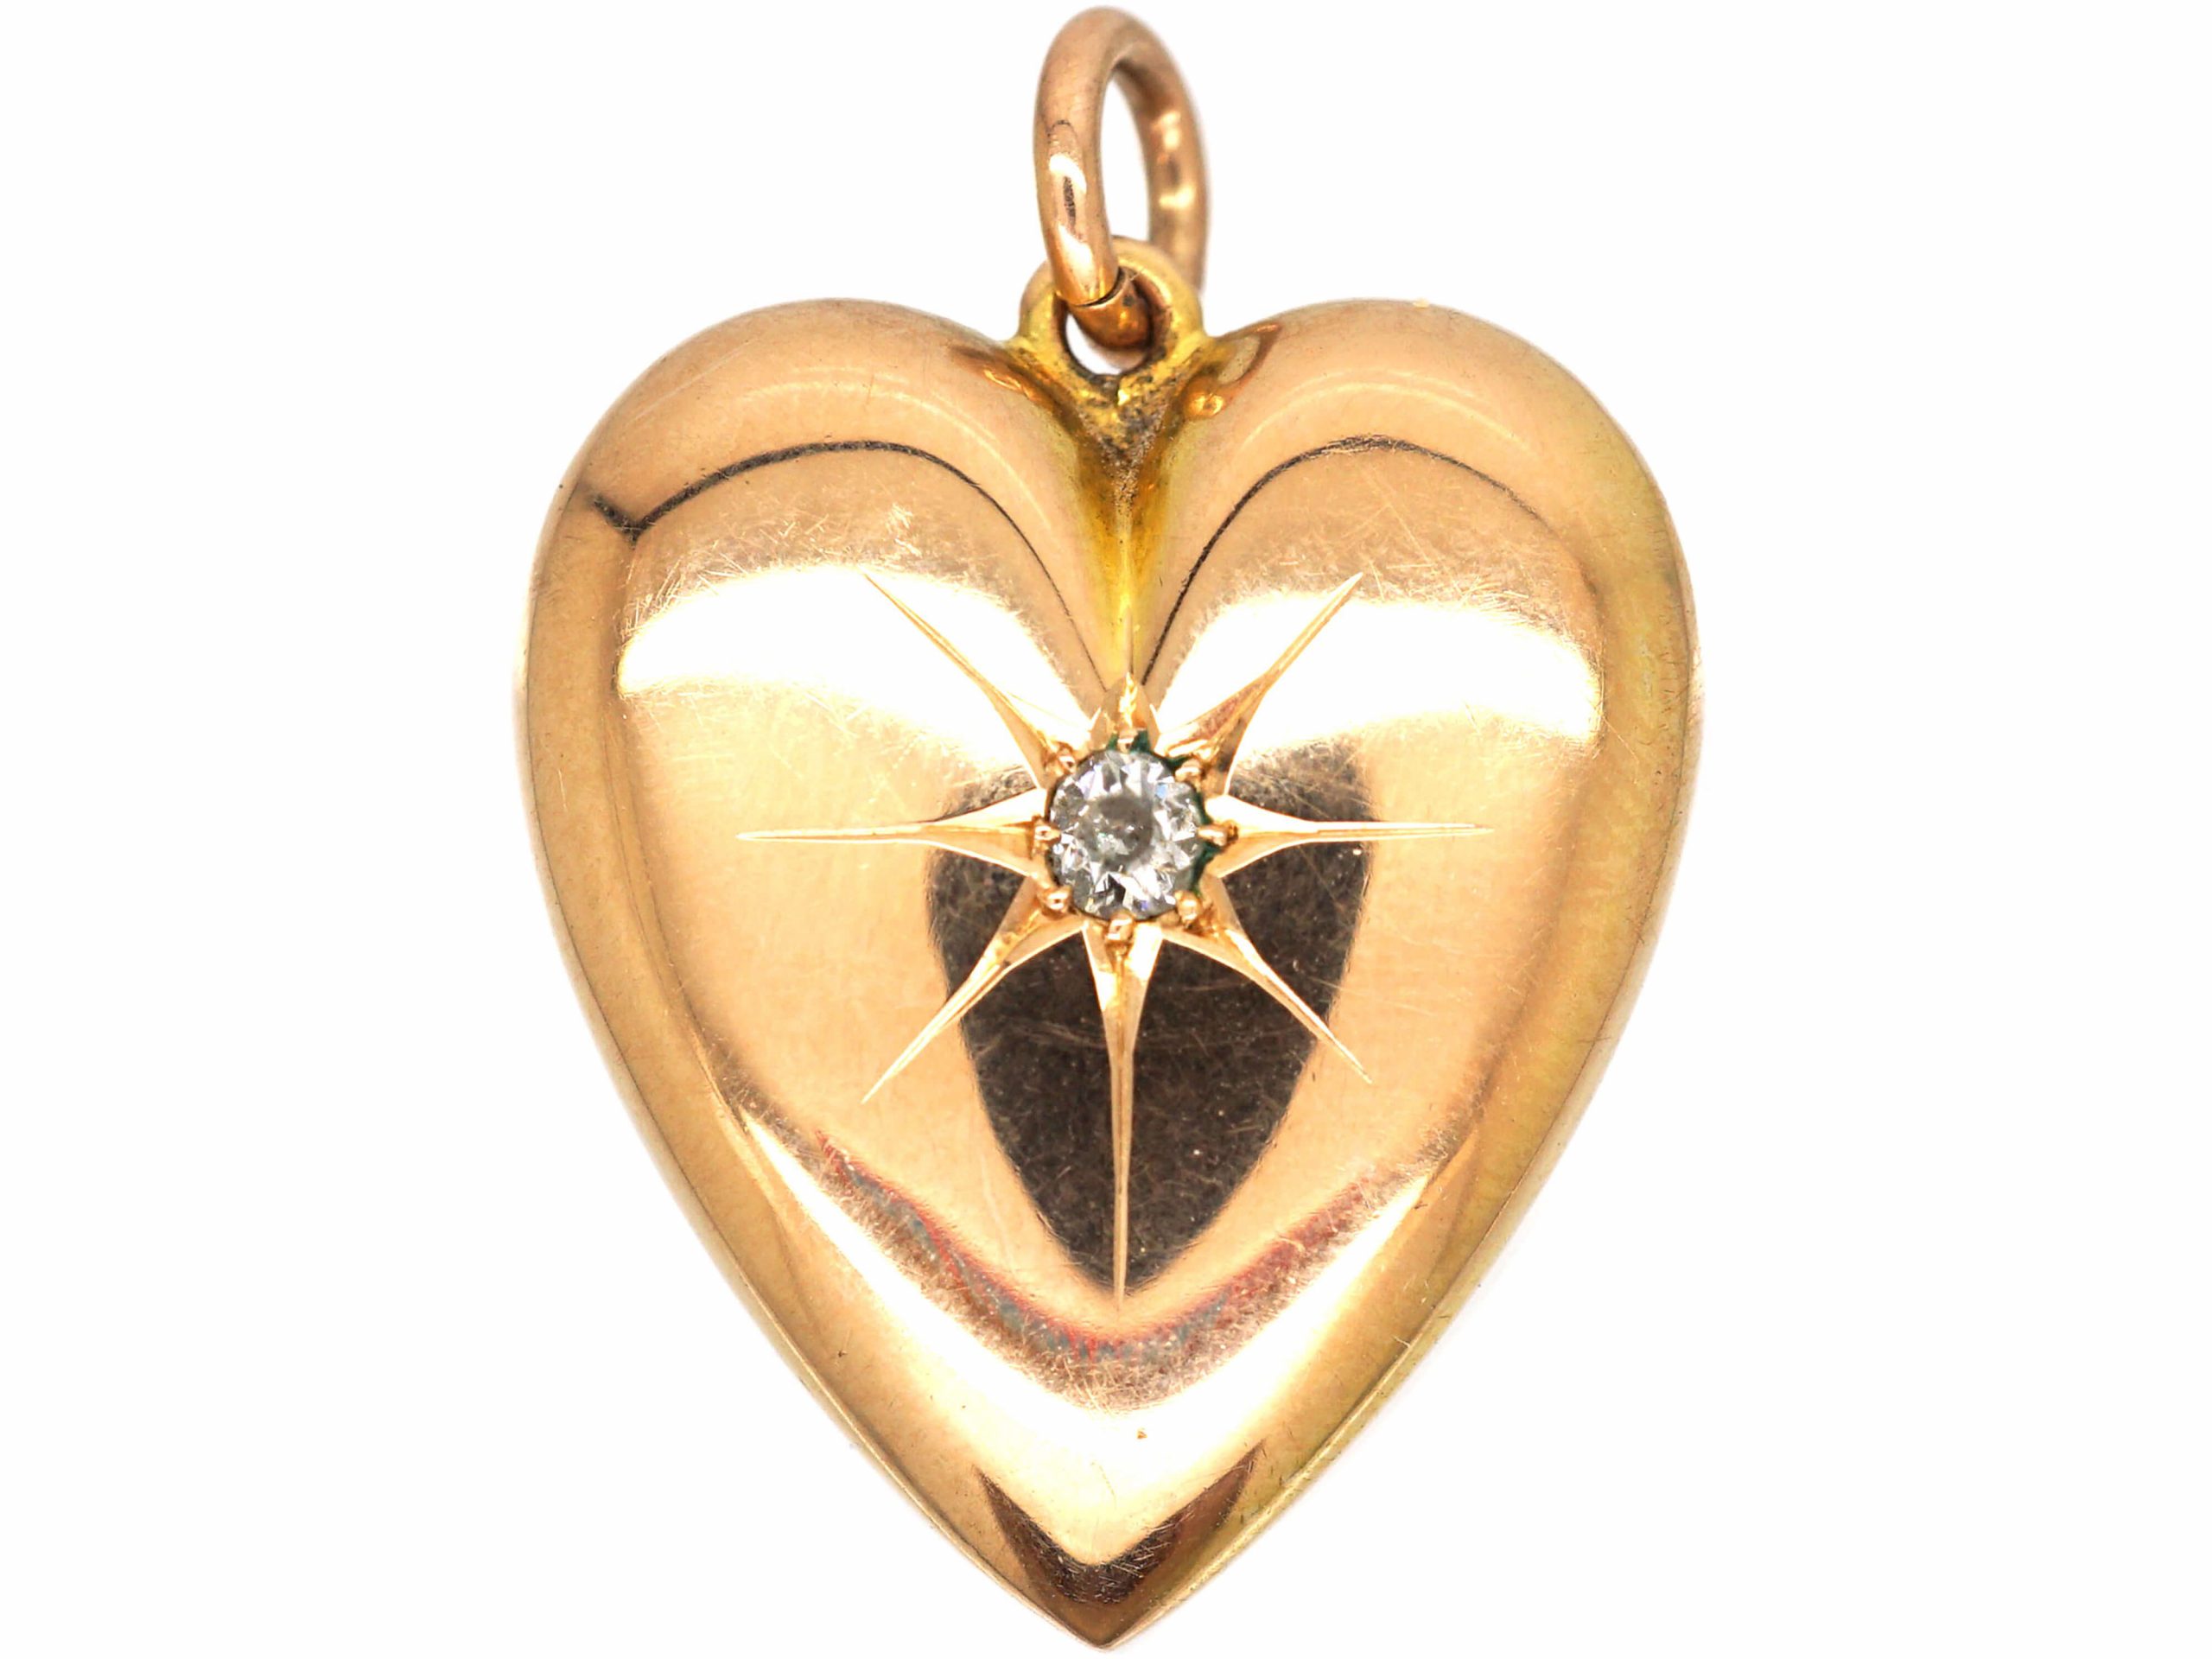 Late Victorian 15ct Gold Heart Pendant set with a Diamond (216S) | The ...